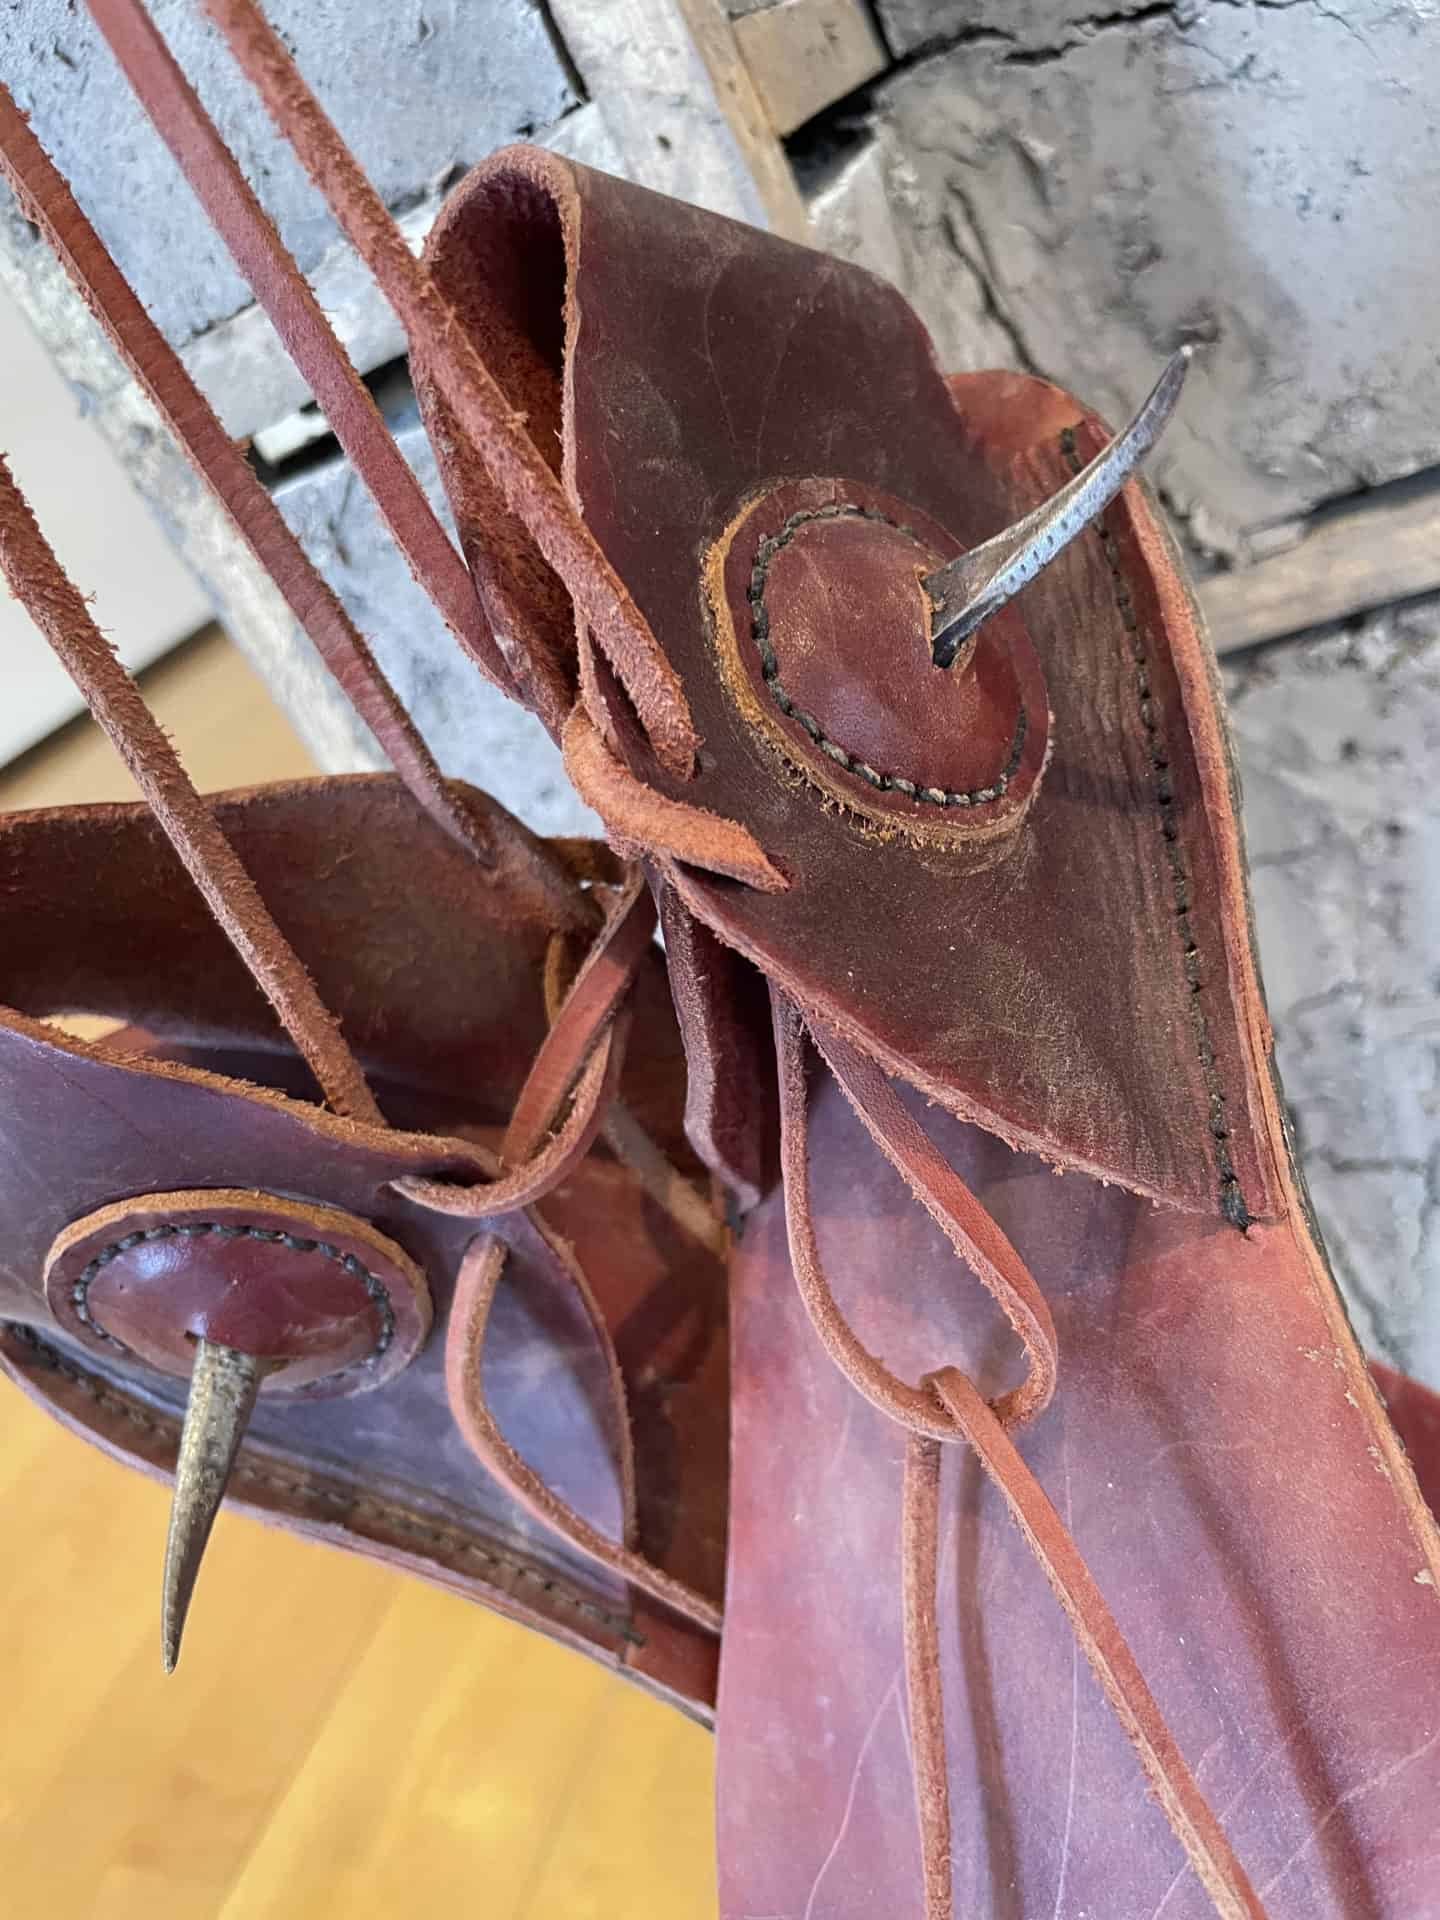 Leather boots with metal spurs hang in Armando Guadalupe Cortés’ 'Castillo' at Mass MoCA.